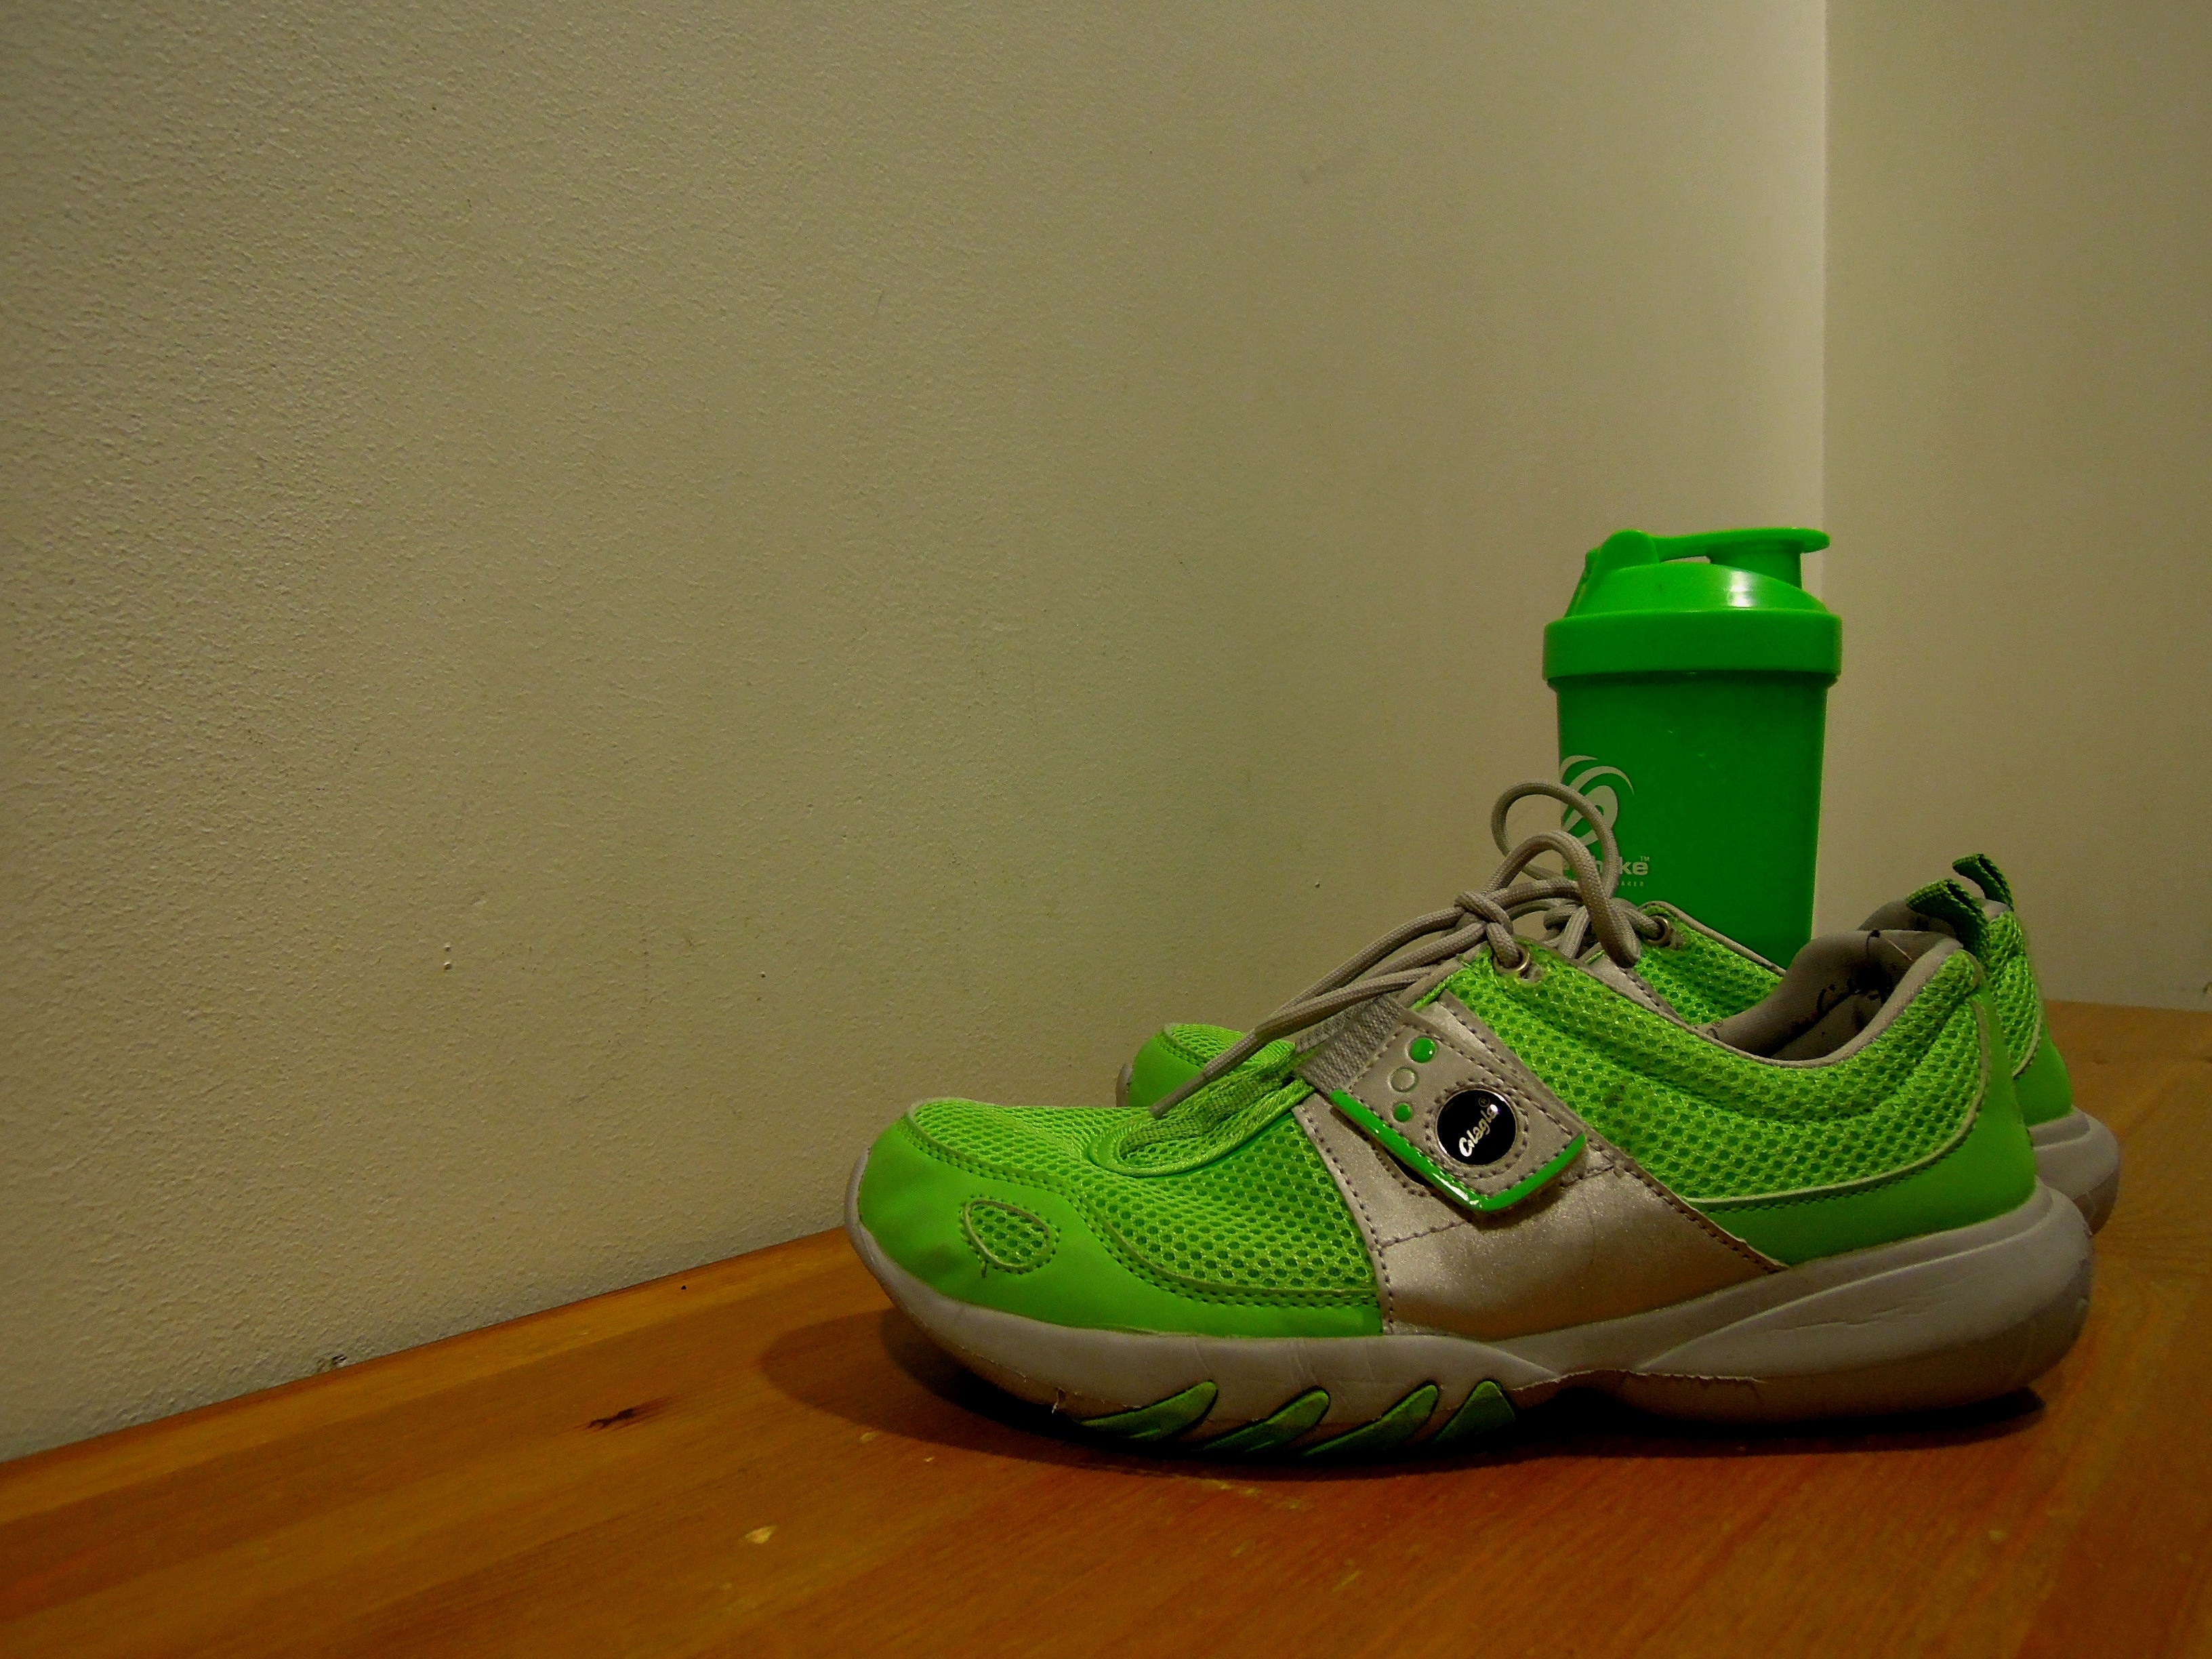 pair of green-and-gray running shoes on brown wooden flooring